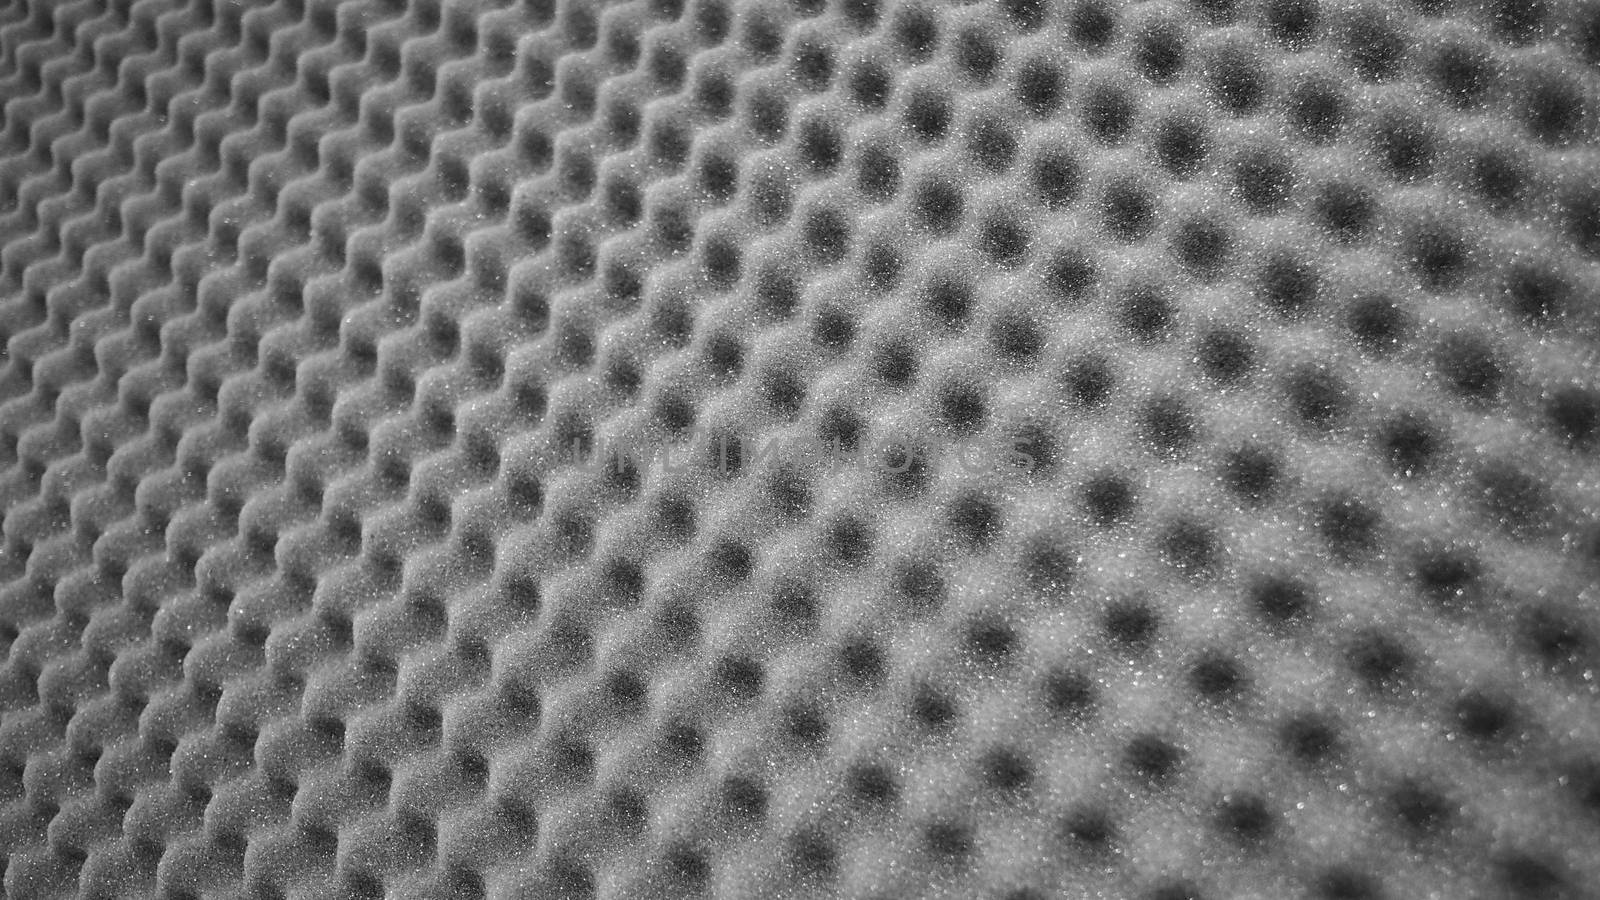 Sound proof acoustic foam on studio wall by gnepphoto